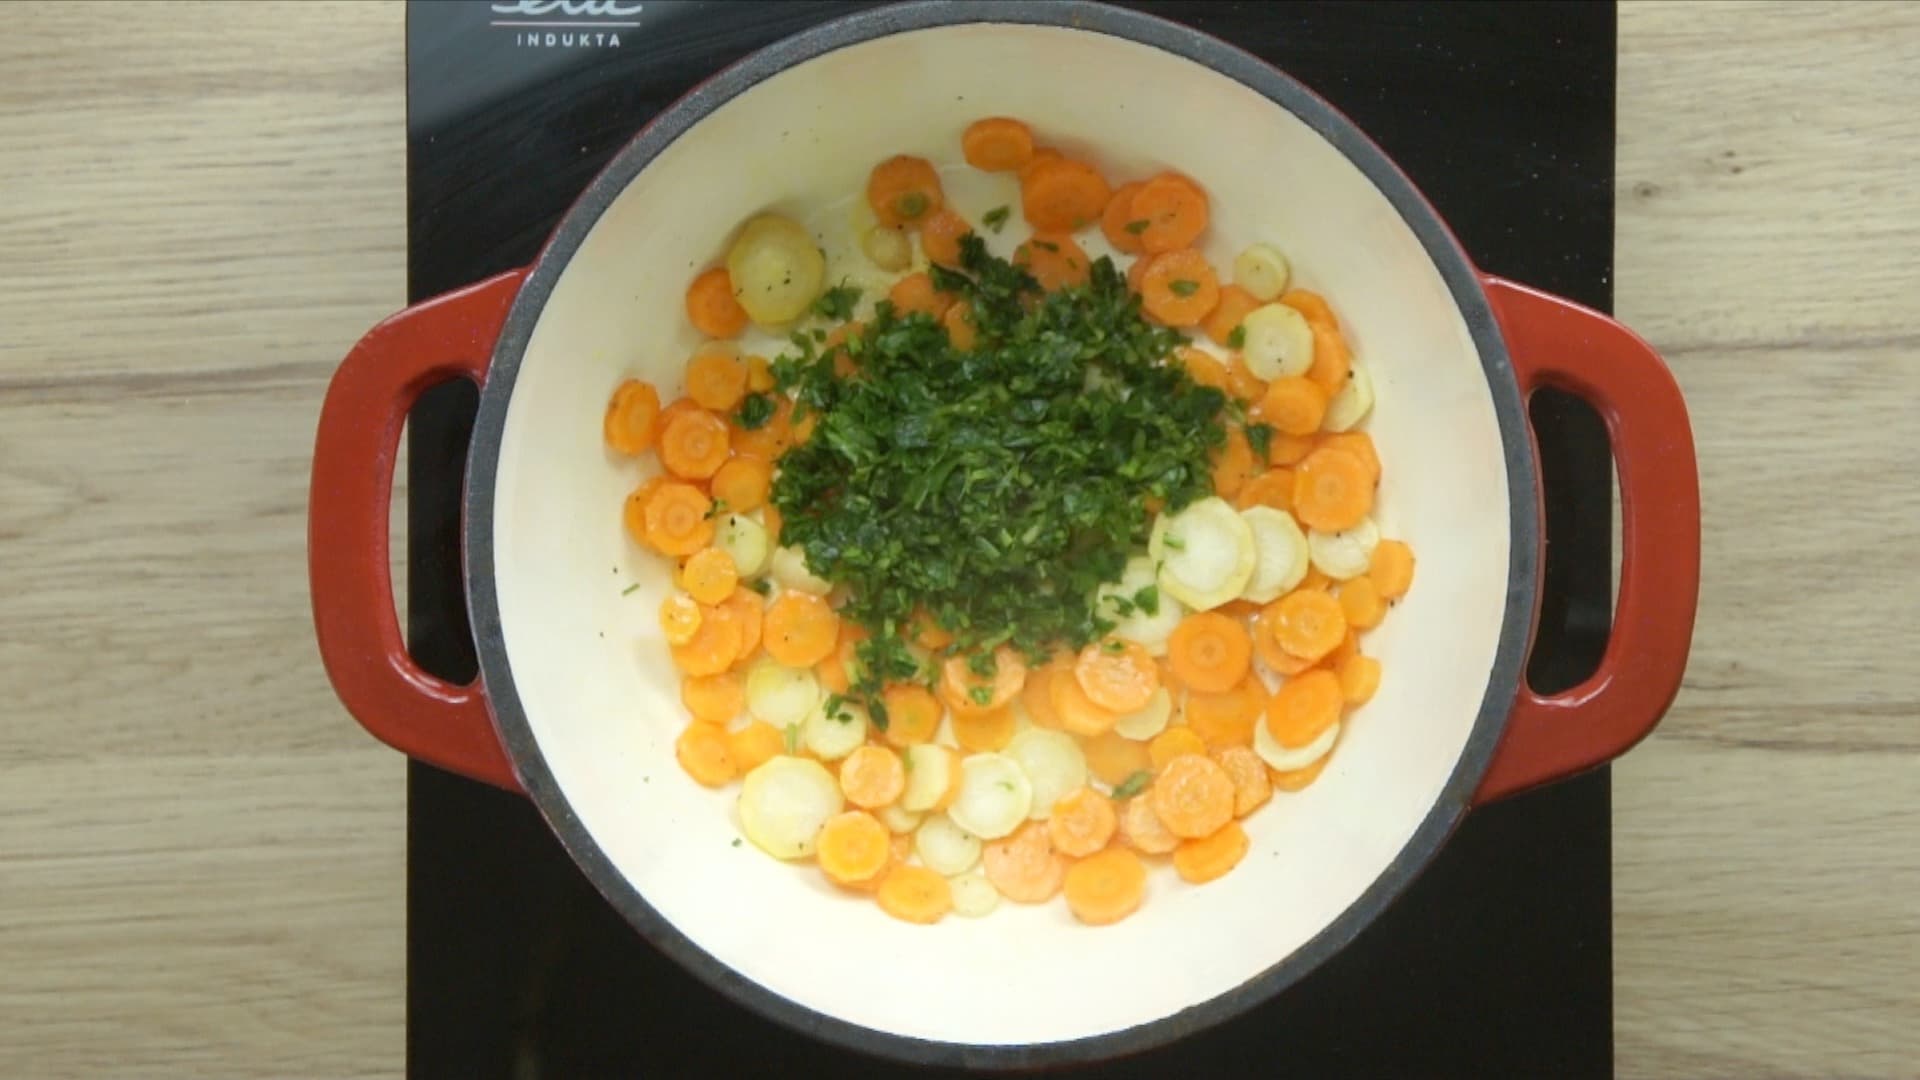 Red enameled Dutch oven with carrot slices, parsnip slices, and freshly chopped green herbs.